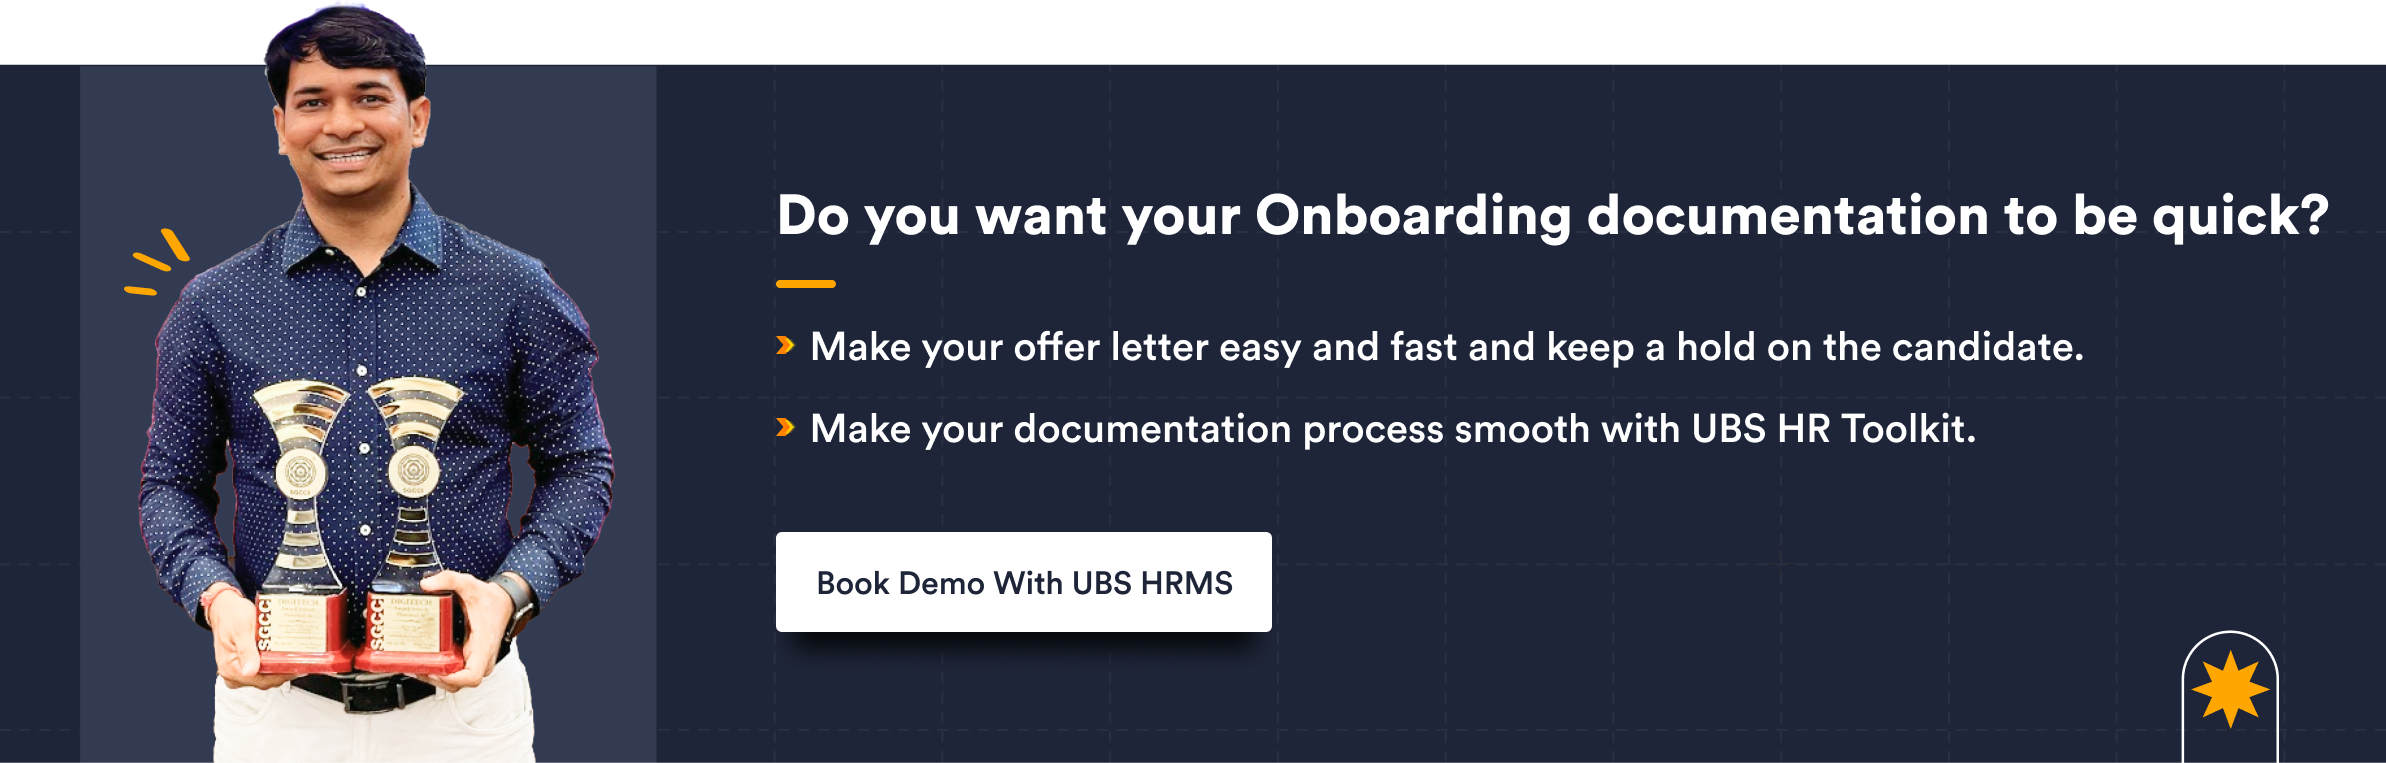 Do you want your Onboarding documentation to be quick